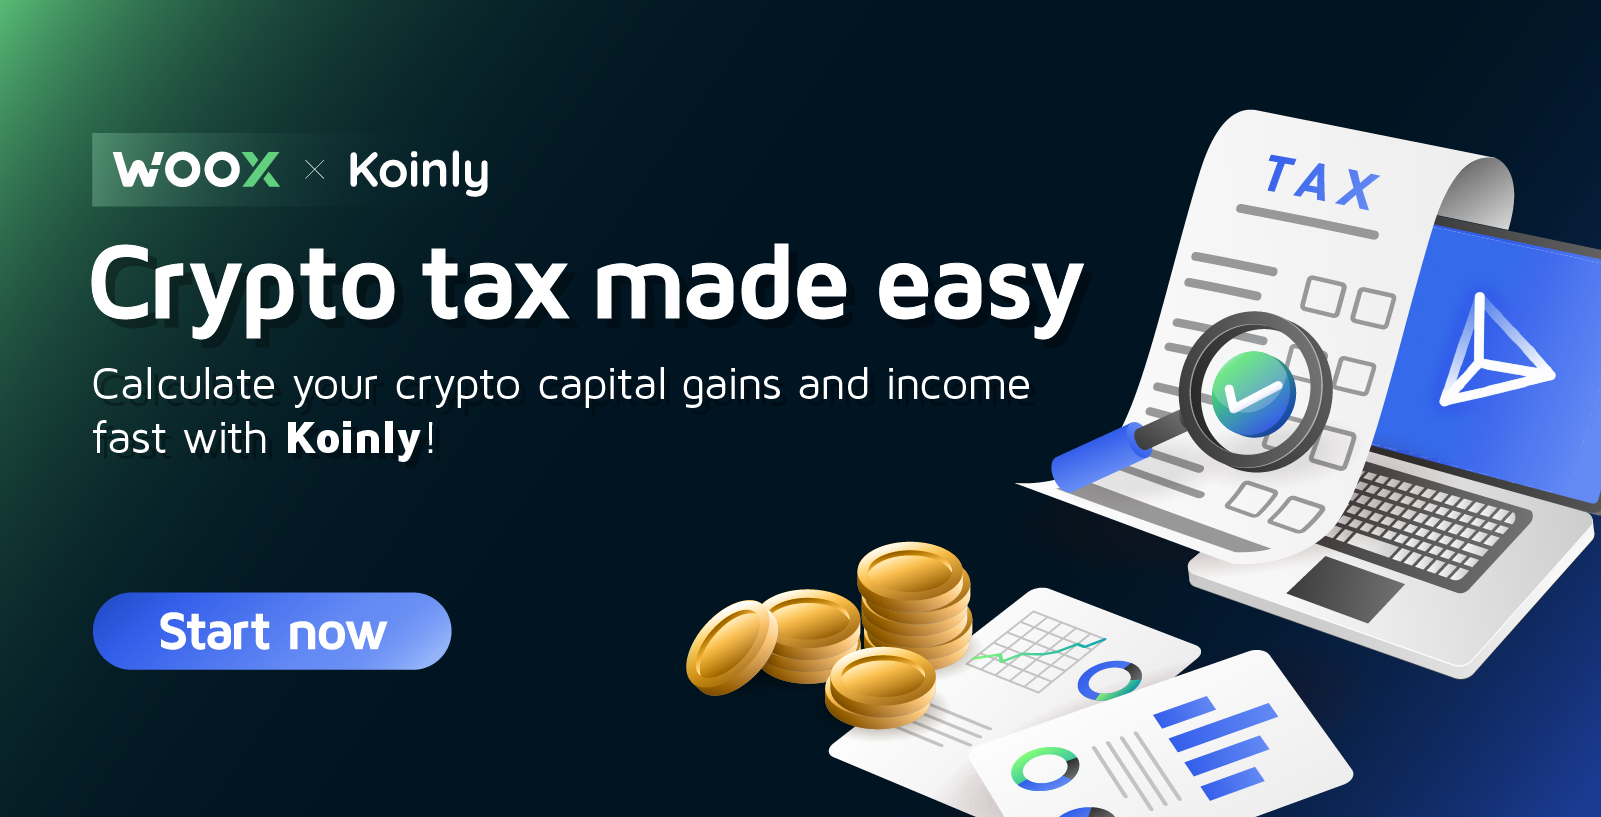 WOO X users can now easily calculate crypto gain taxes via Koinly